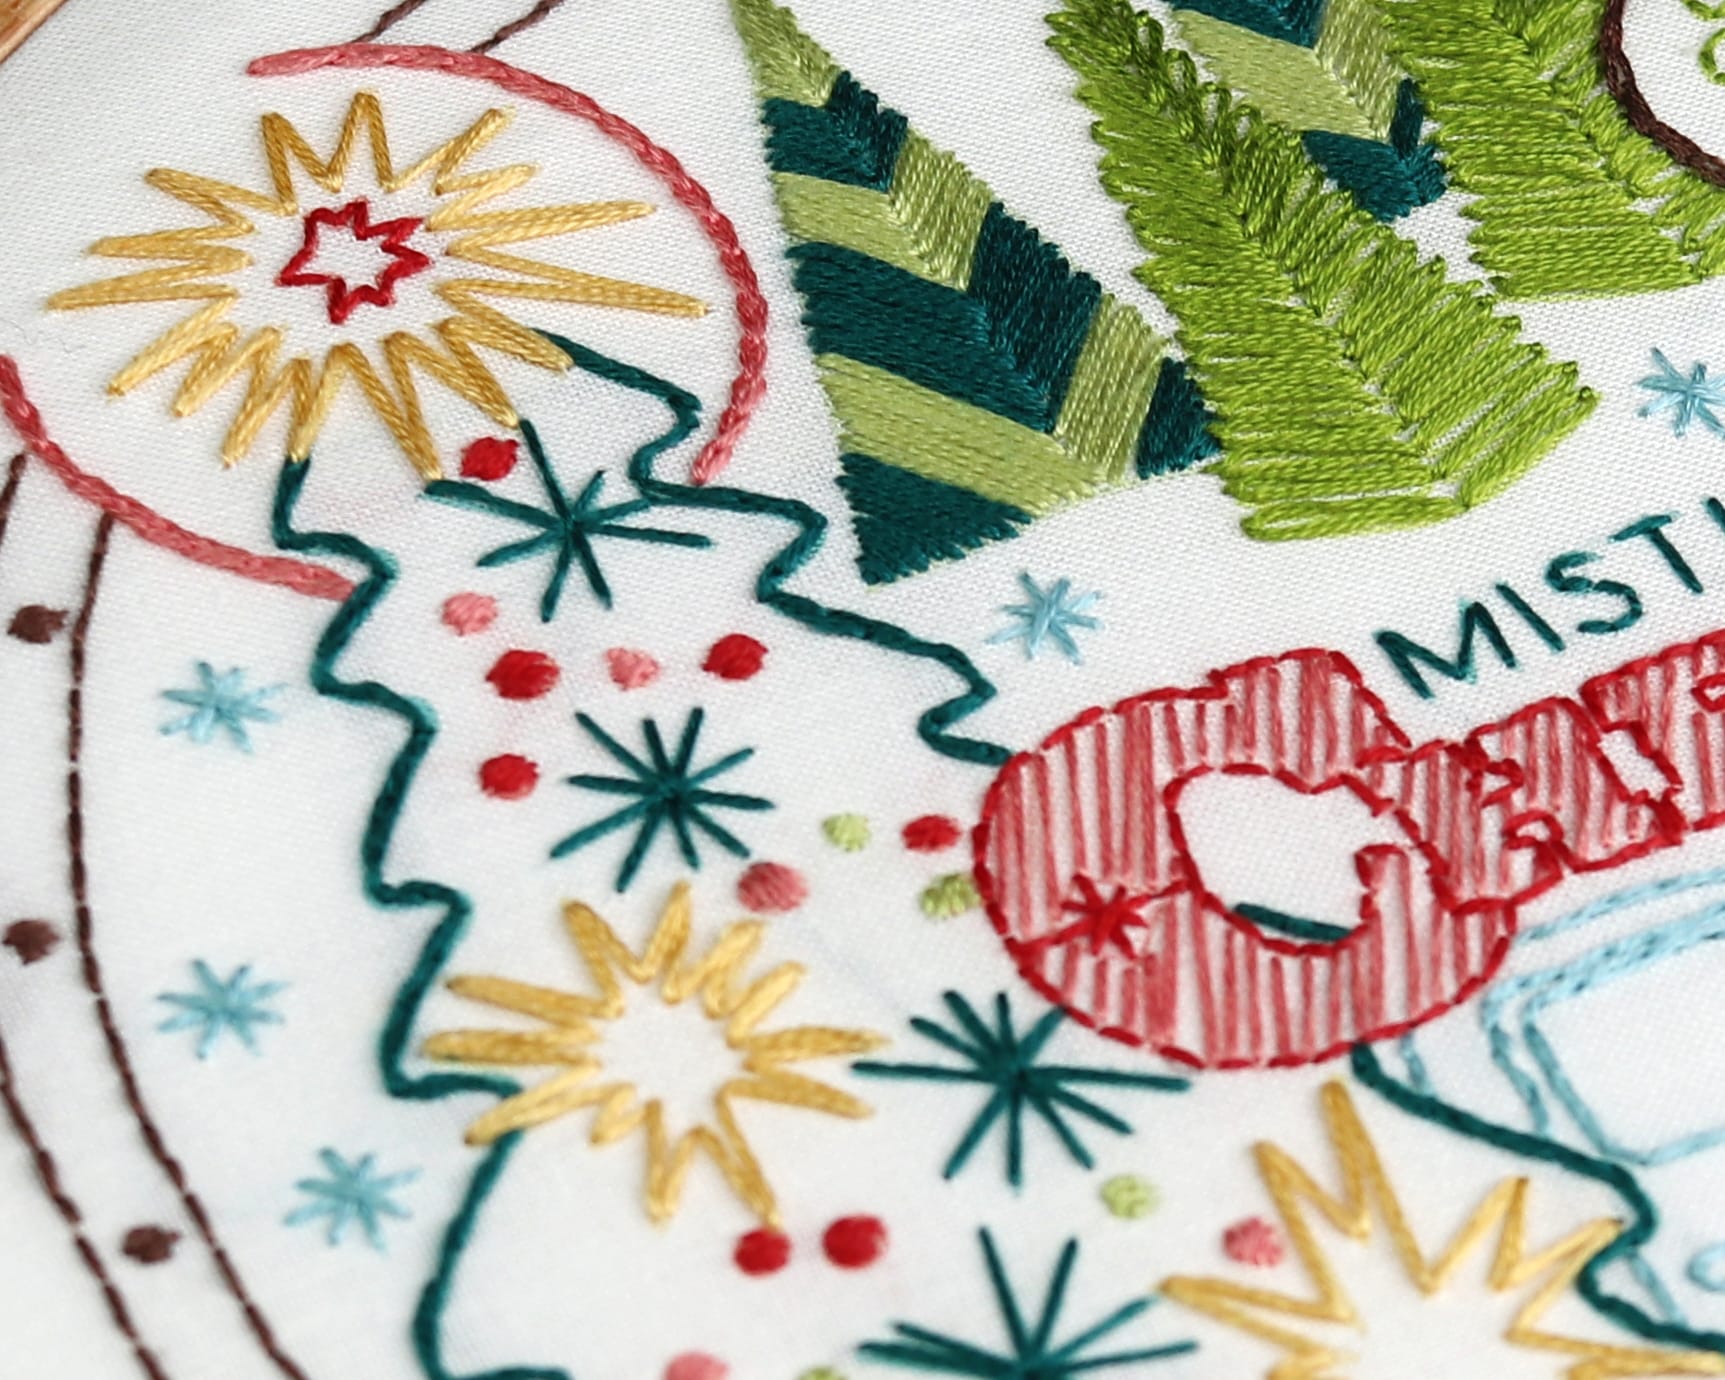 Detail of Christmas embroidery